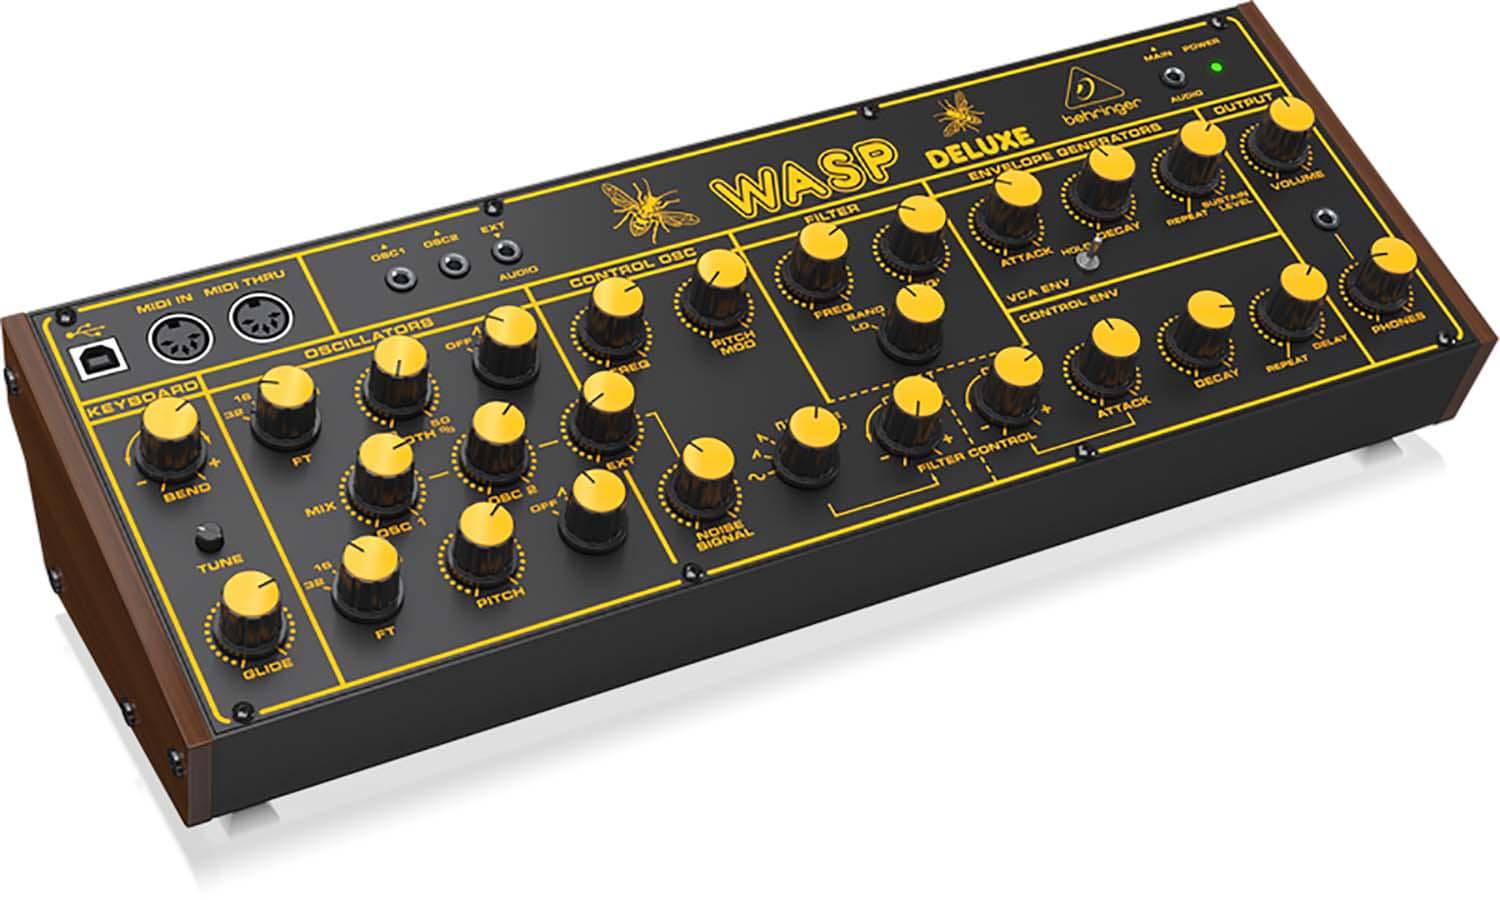 Behringer WASP DELUXE Legendary Hybrid Synthesizer With Dual Oscs, Multi-Mode VCF And 16-Voice Poly Chain - Hollywood DJ